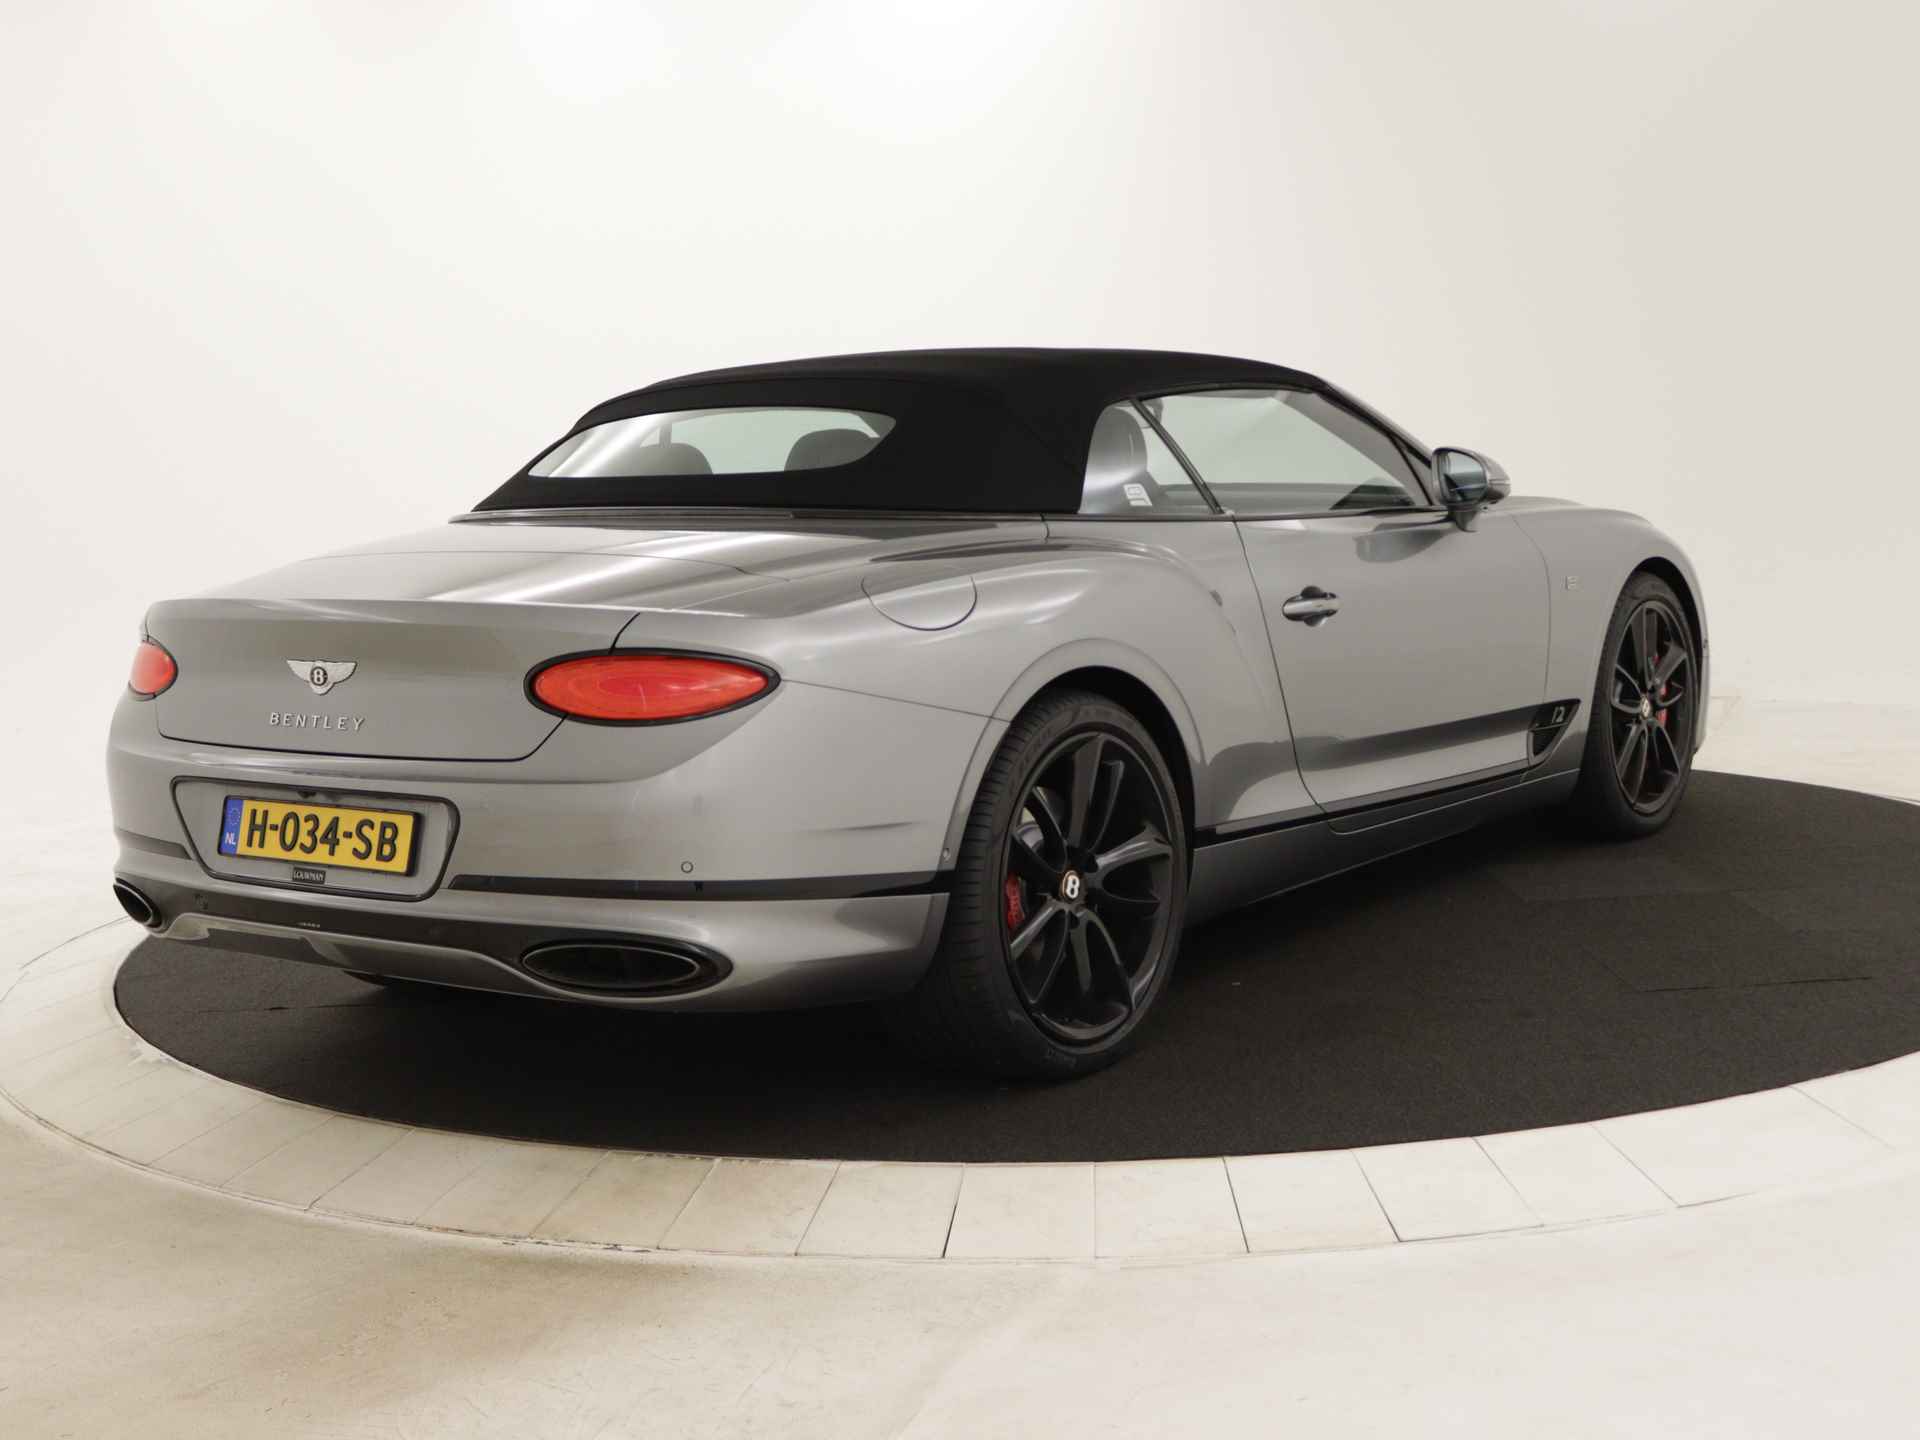 Bentley Continental GTC 6.0 W12 First Edition Mulliner - Bang & Olufsen - Black package - Massage seats - 41/46